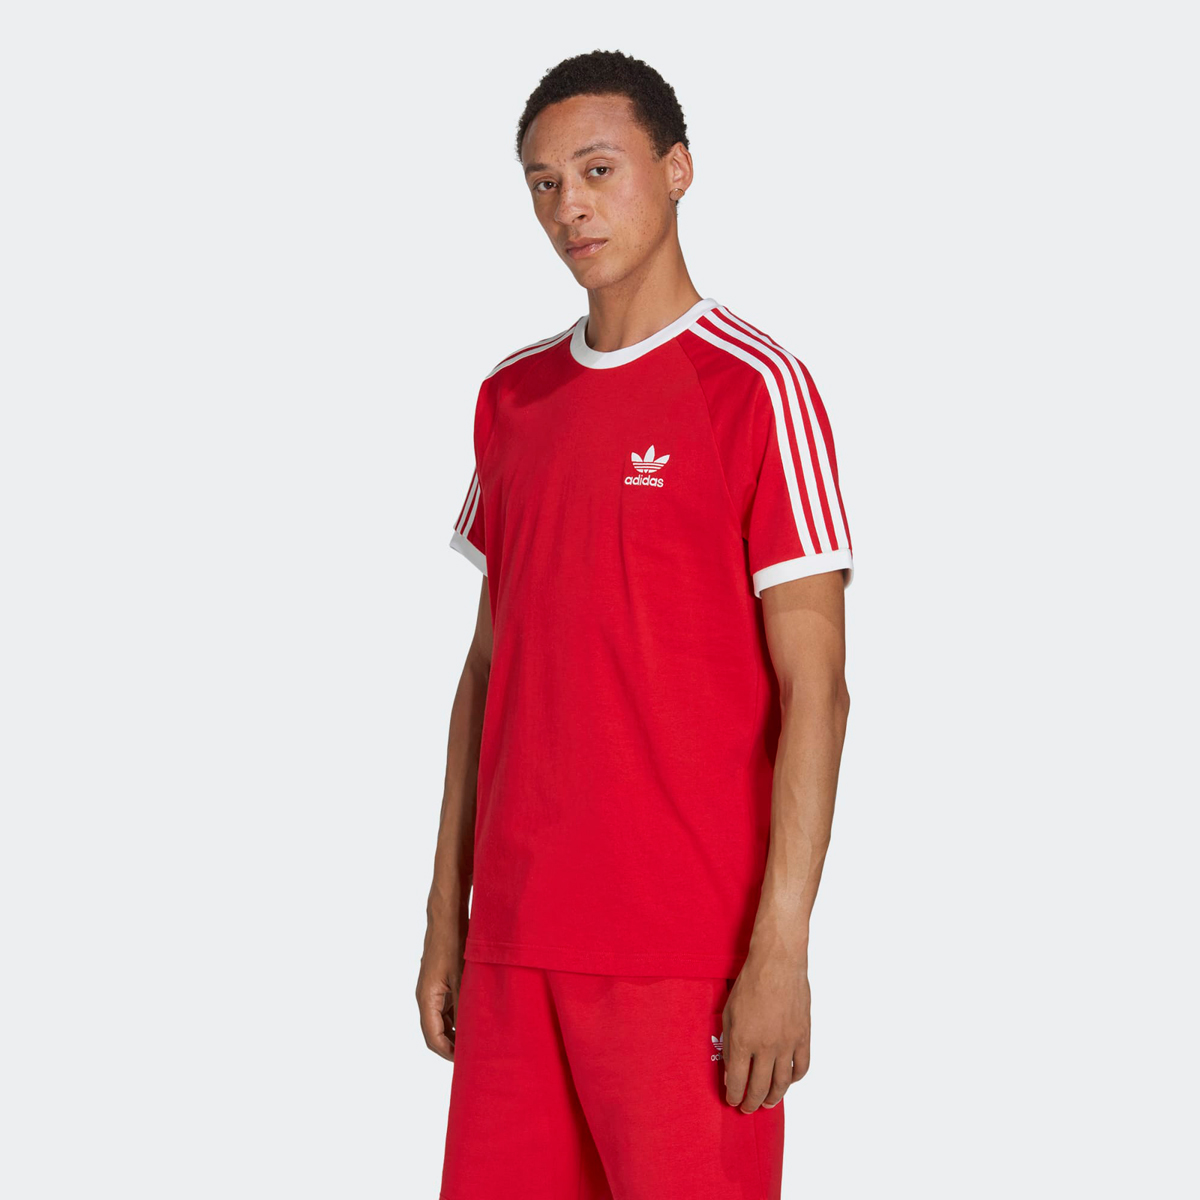 adidas-Adicolor-Classics-3-Stripes-T-Shirt-Better-Scarlet-Red